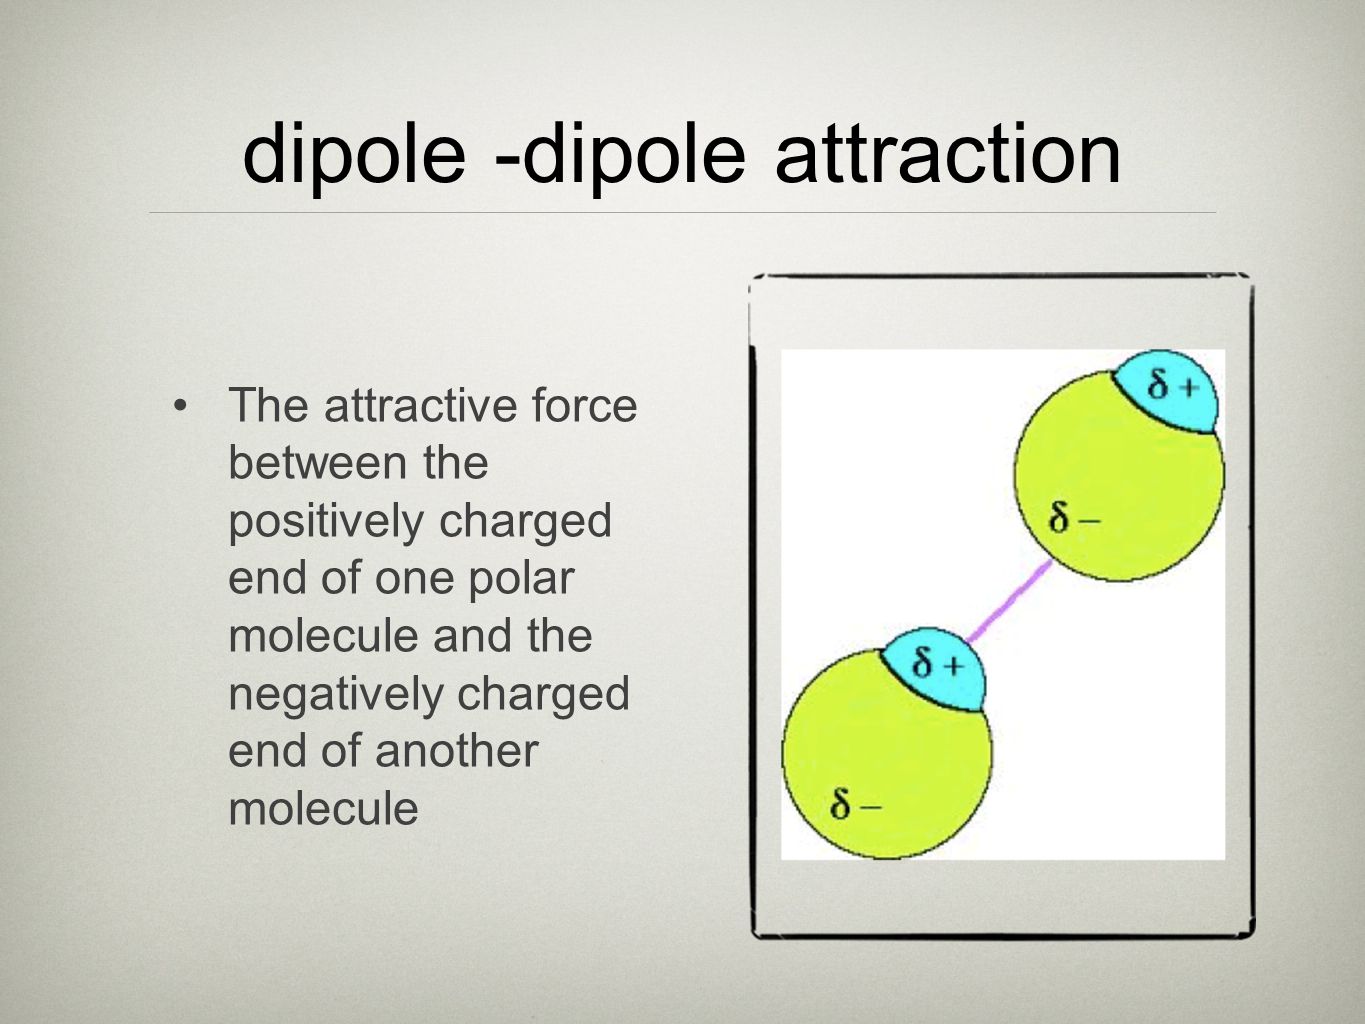 dipole -dipole attraction